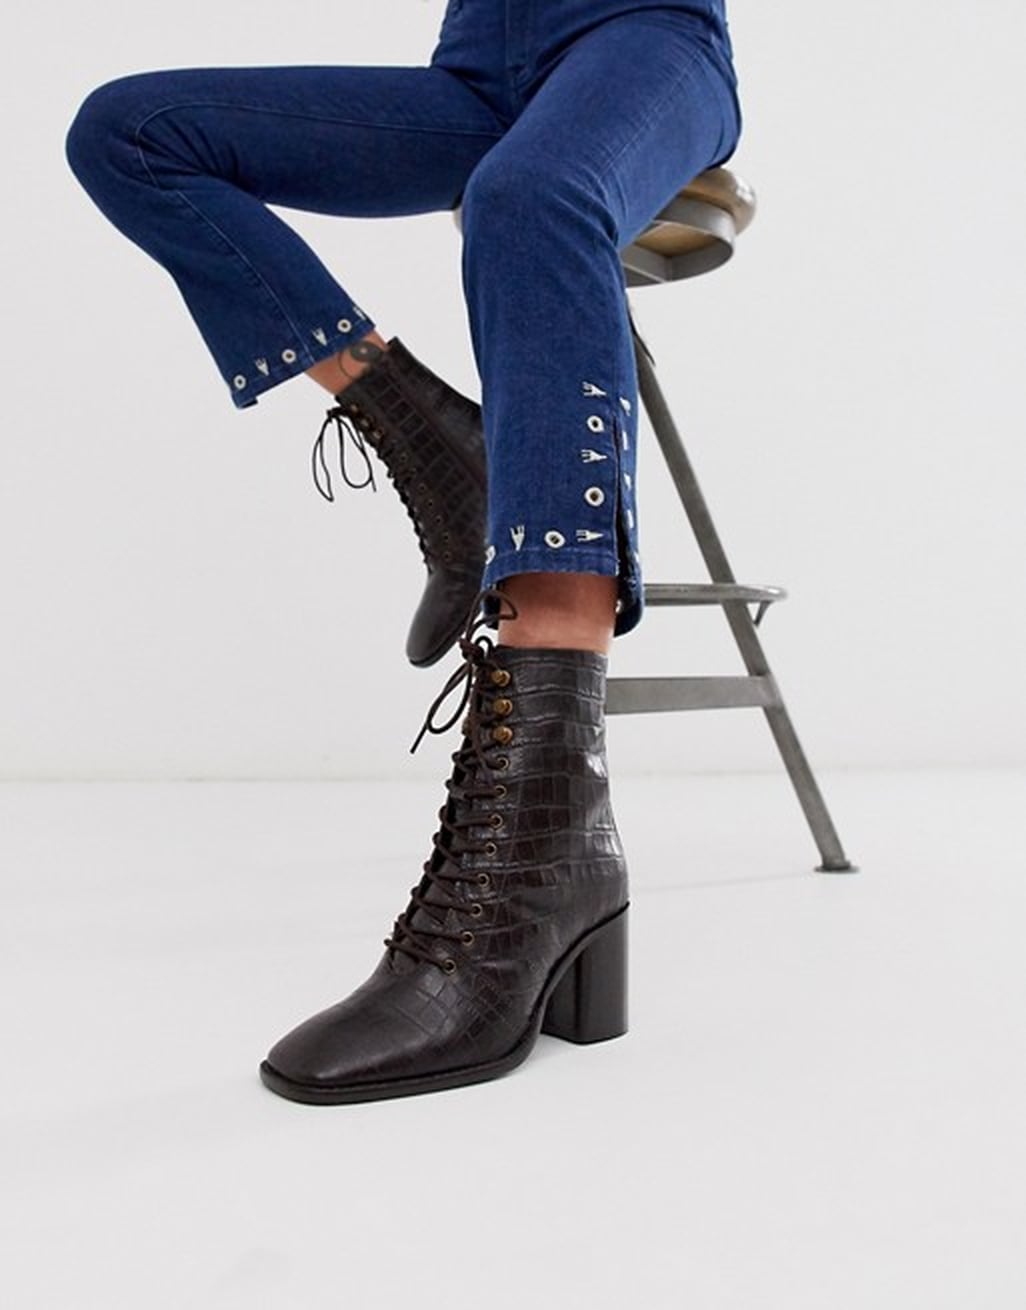 Best Fall Boots 2019 - From Booties to Over-the-knee Boots | POPSUGAR ...